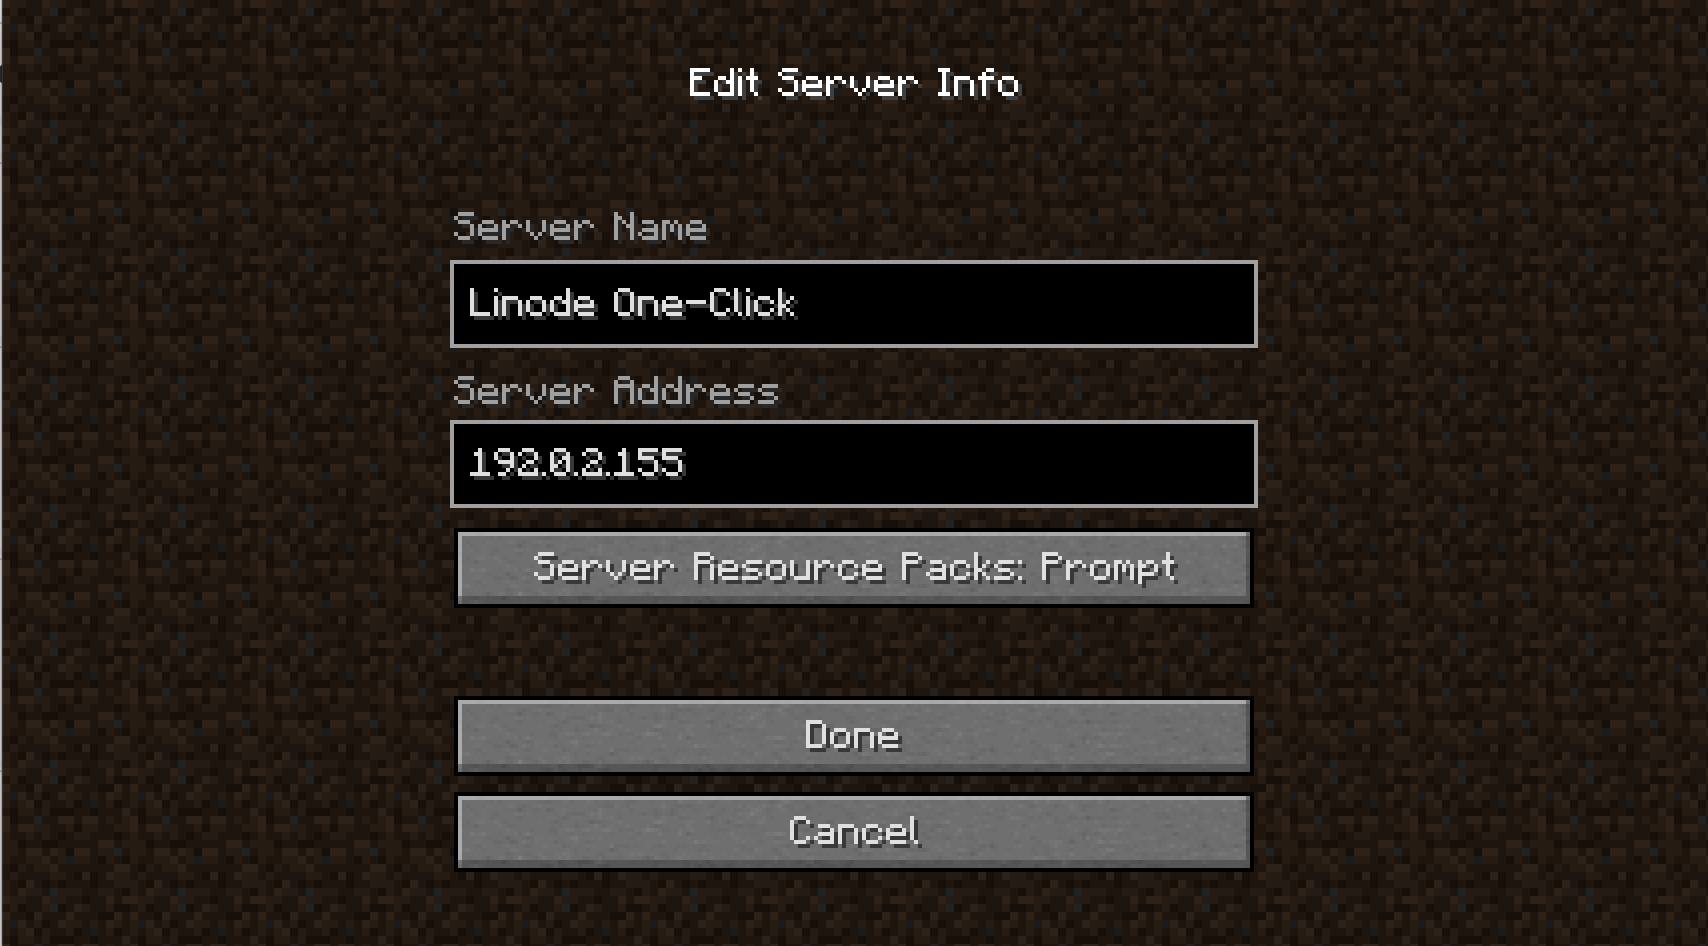 Paste your IP address in the Server Address field.